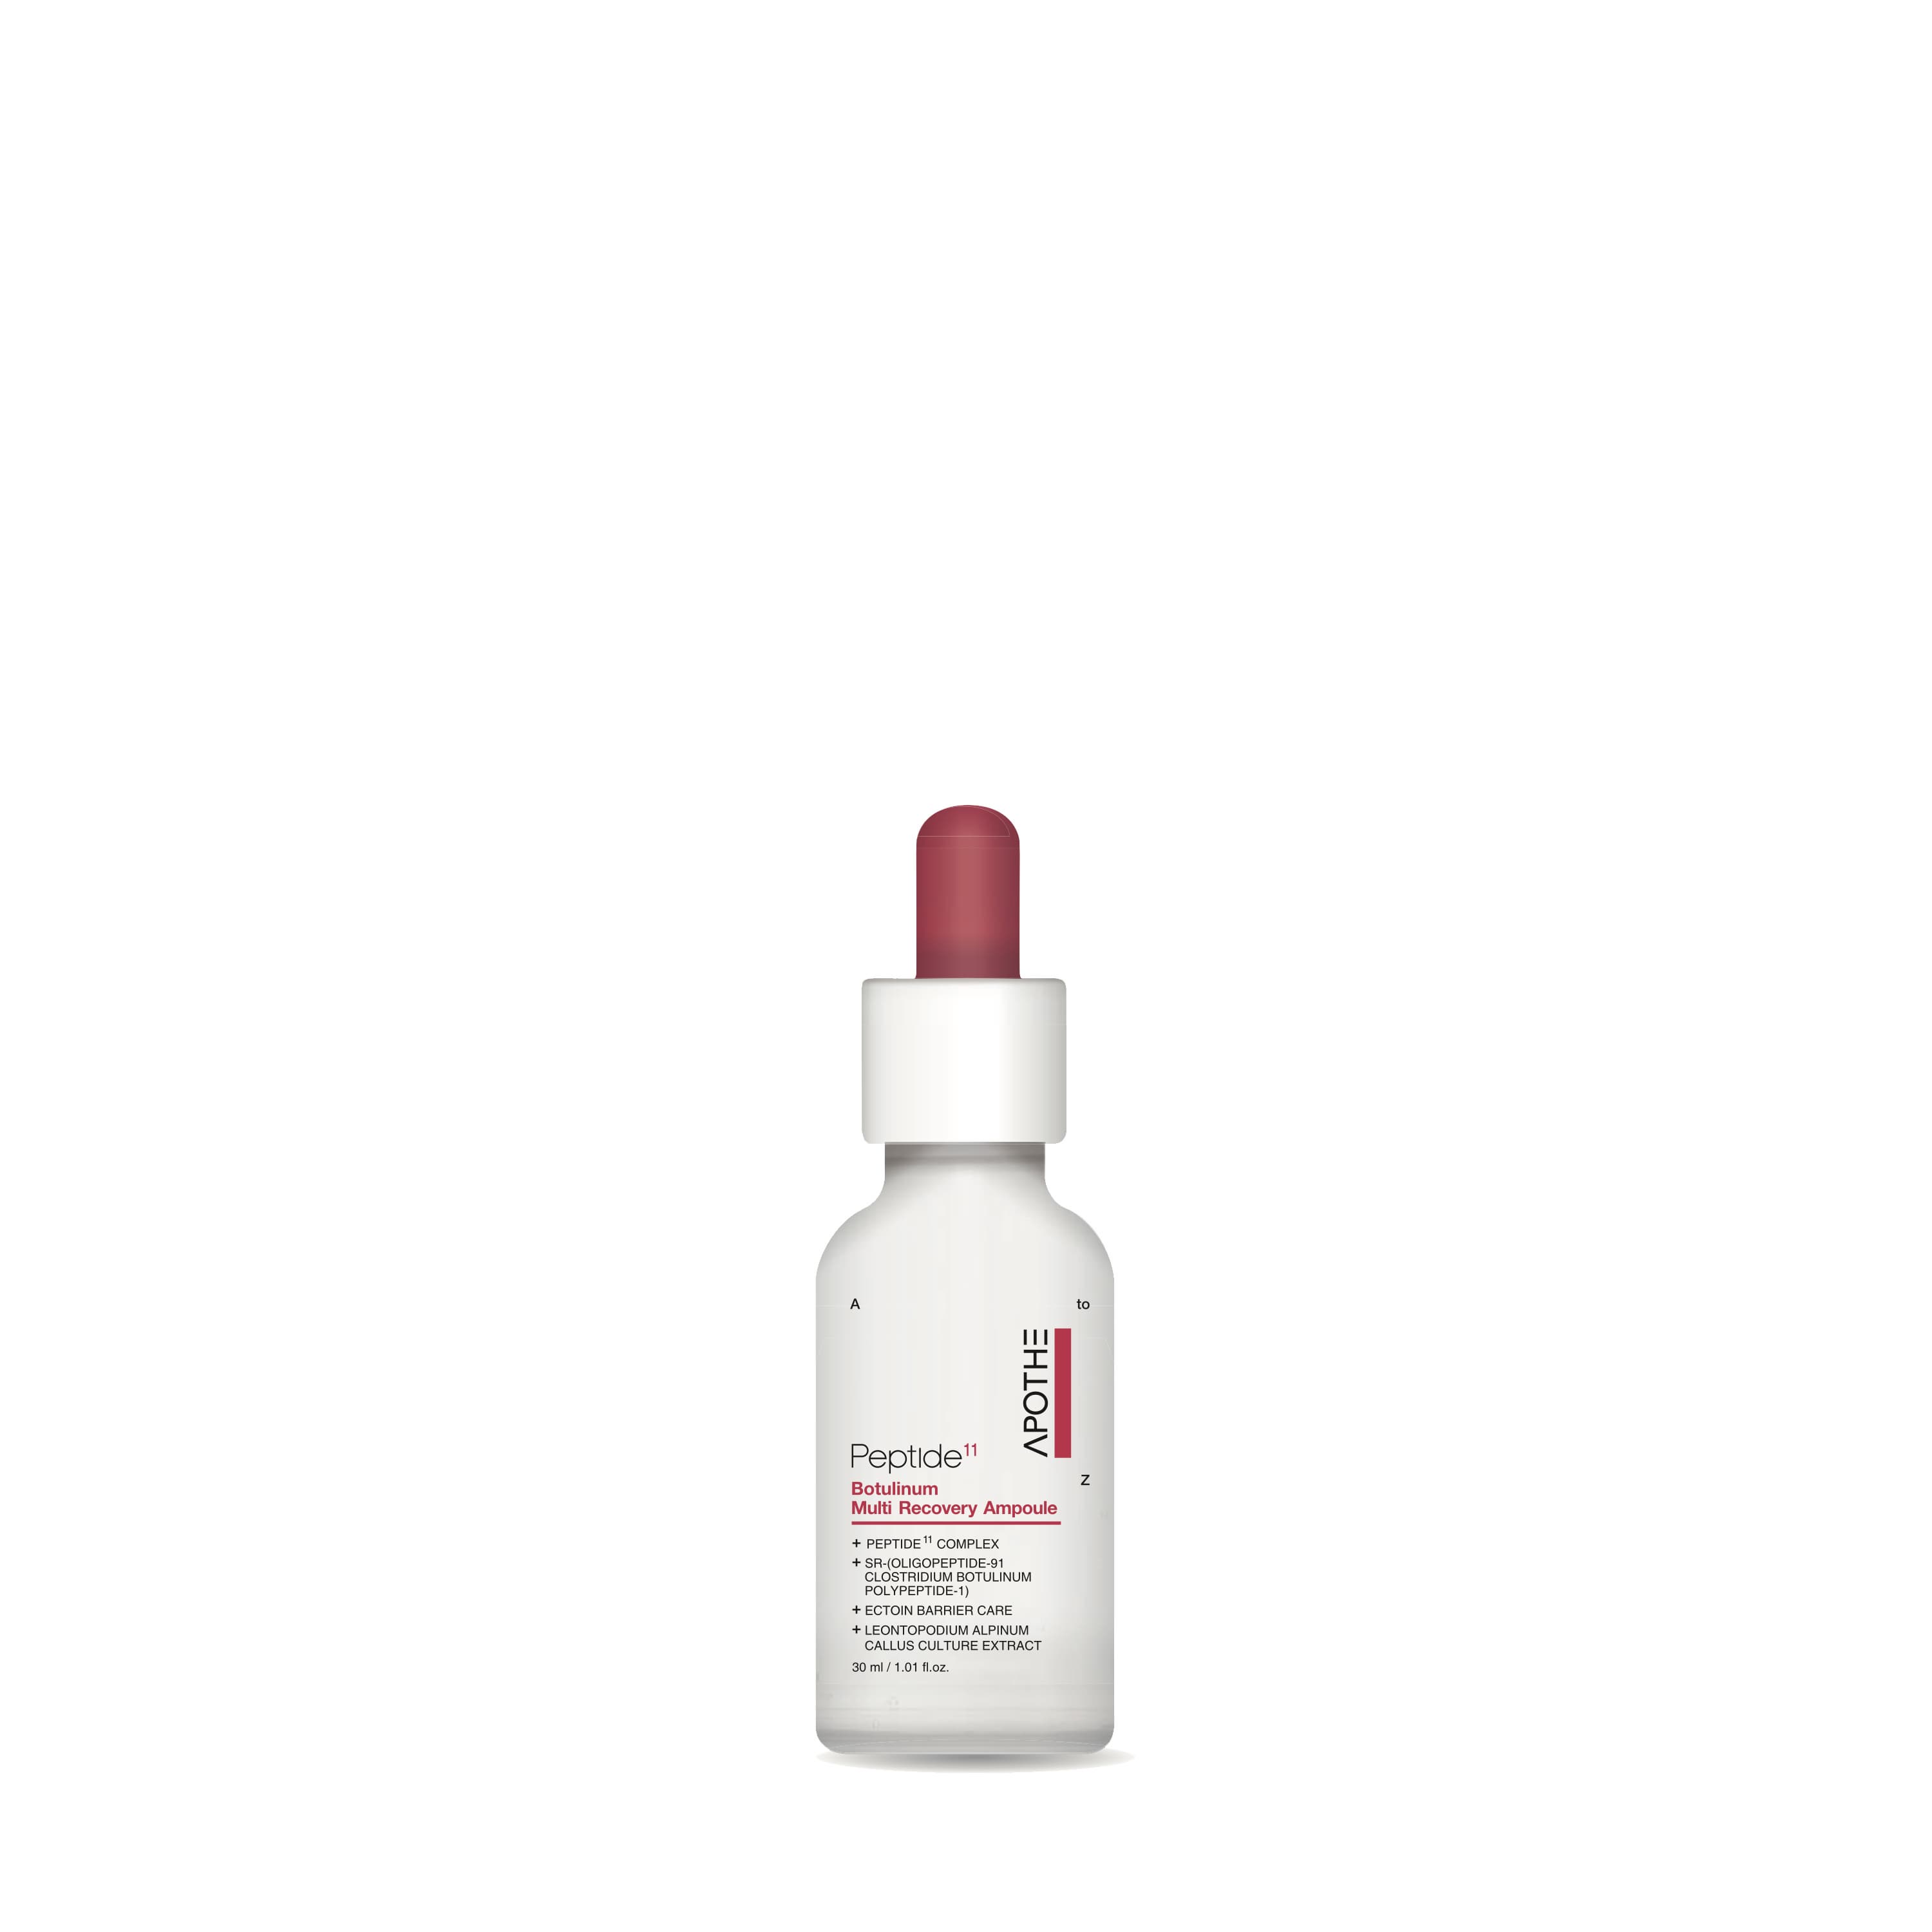 Elasticity intensive ampoule that finds and boosts hidden core elasticity_